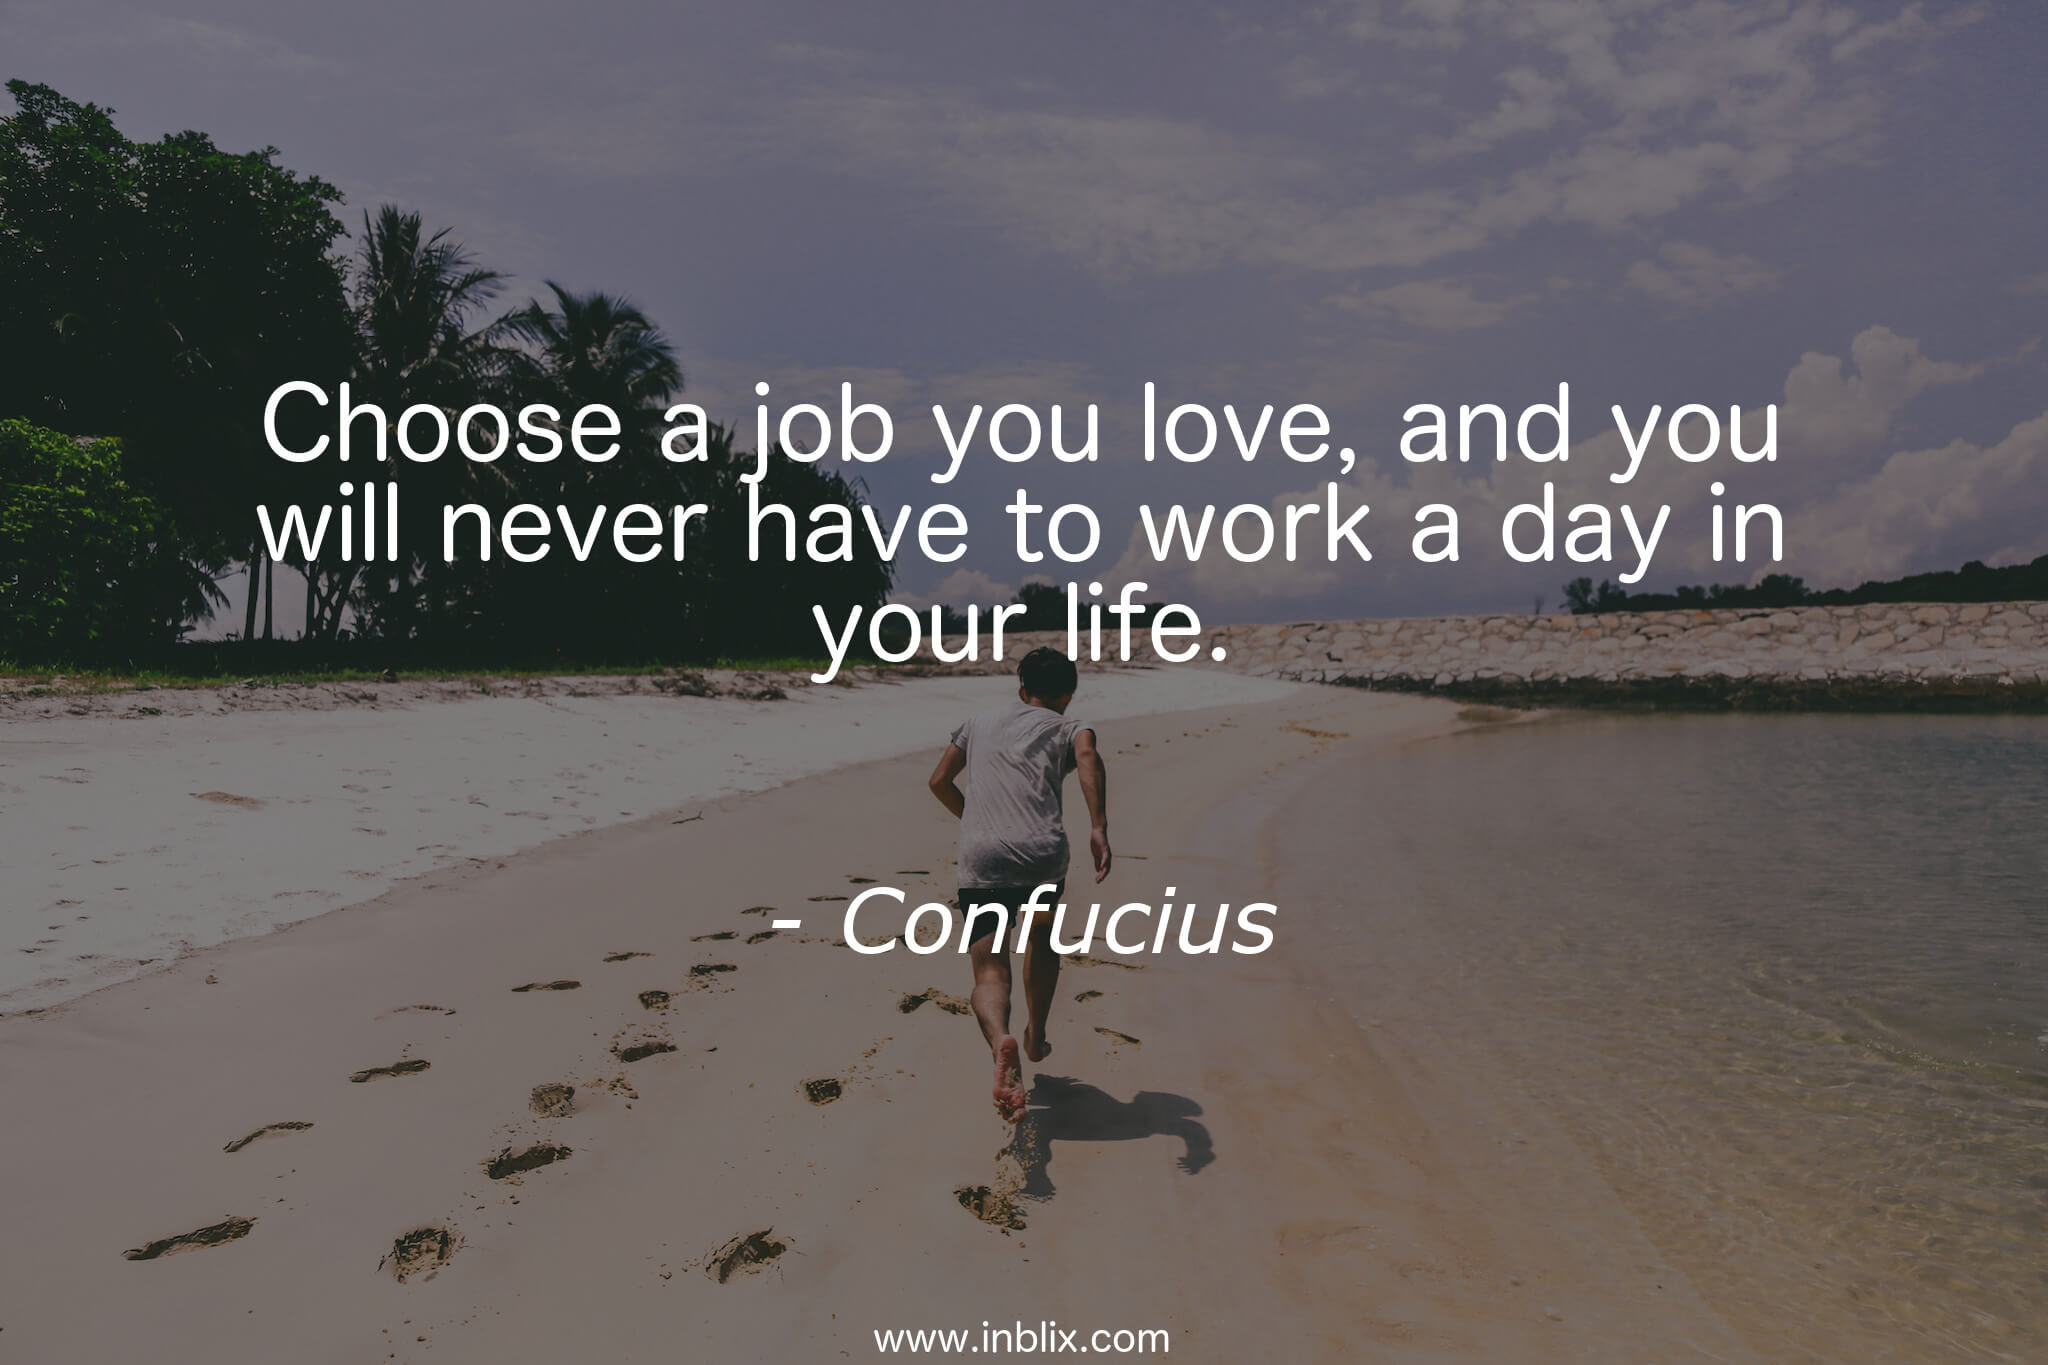 Choose a job you love and you will never have to work a day in